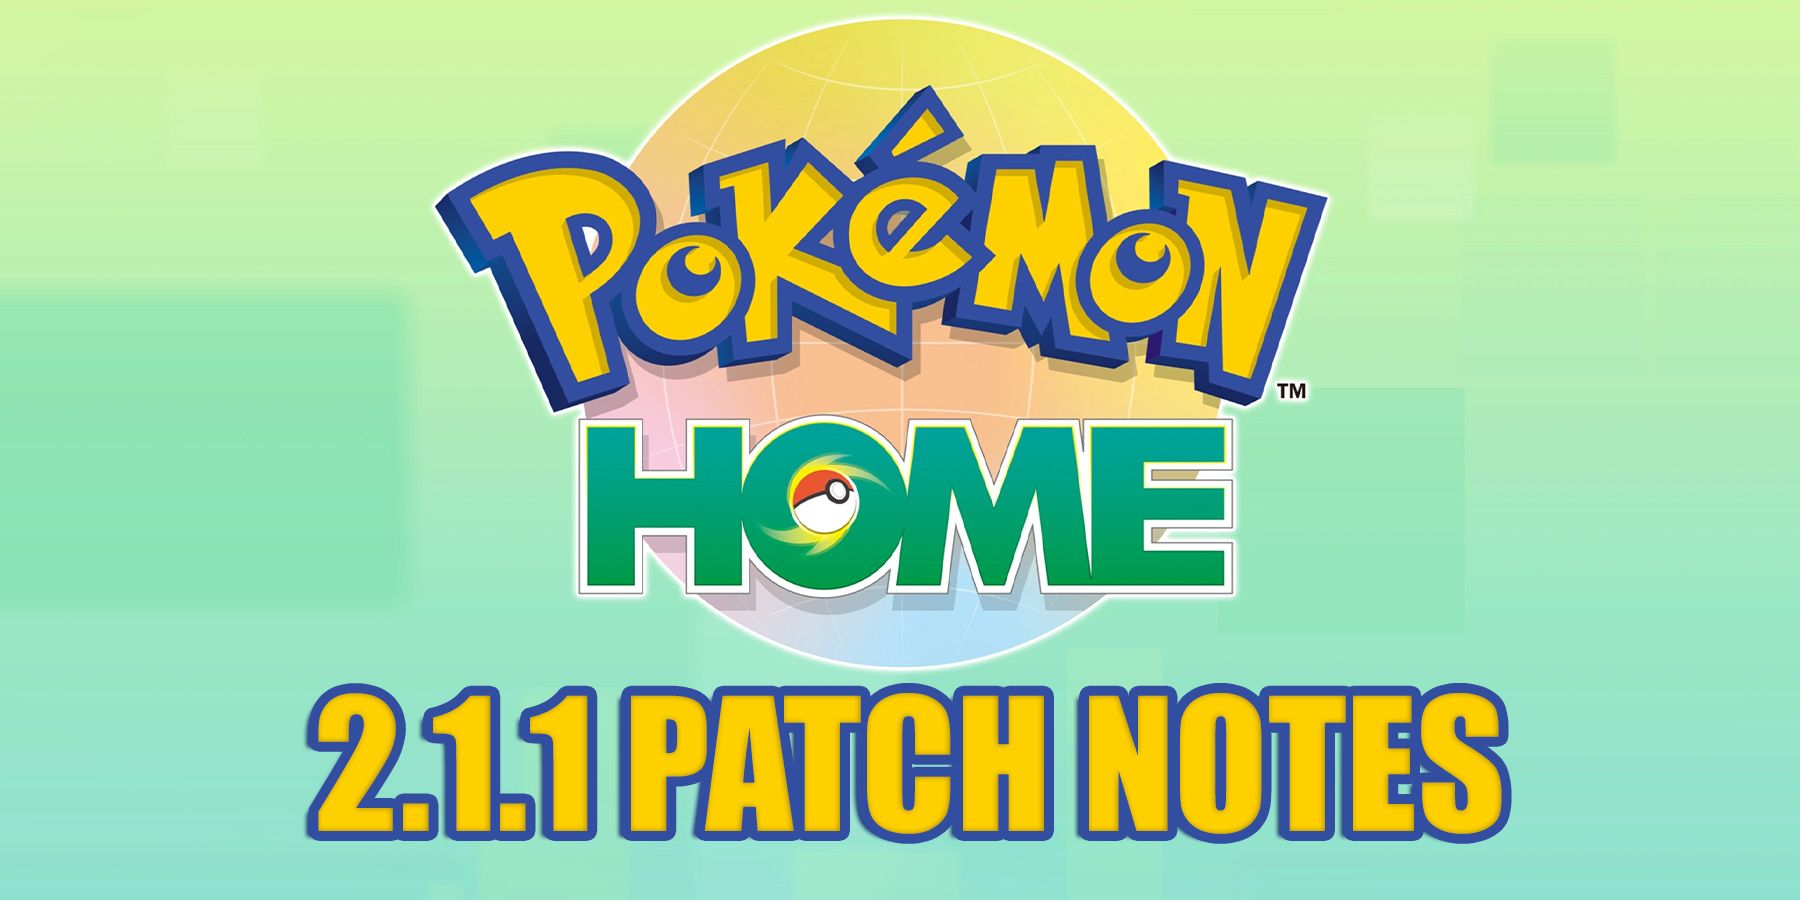 Pokemon Home Update 2_1_1 patch notes